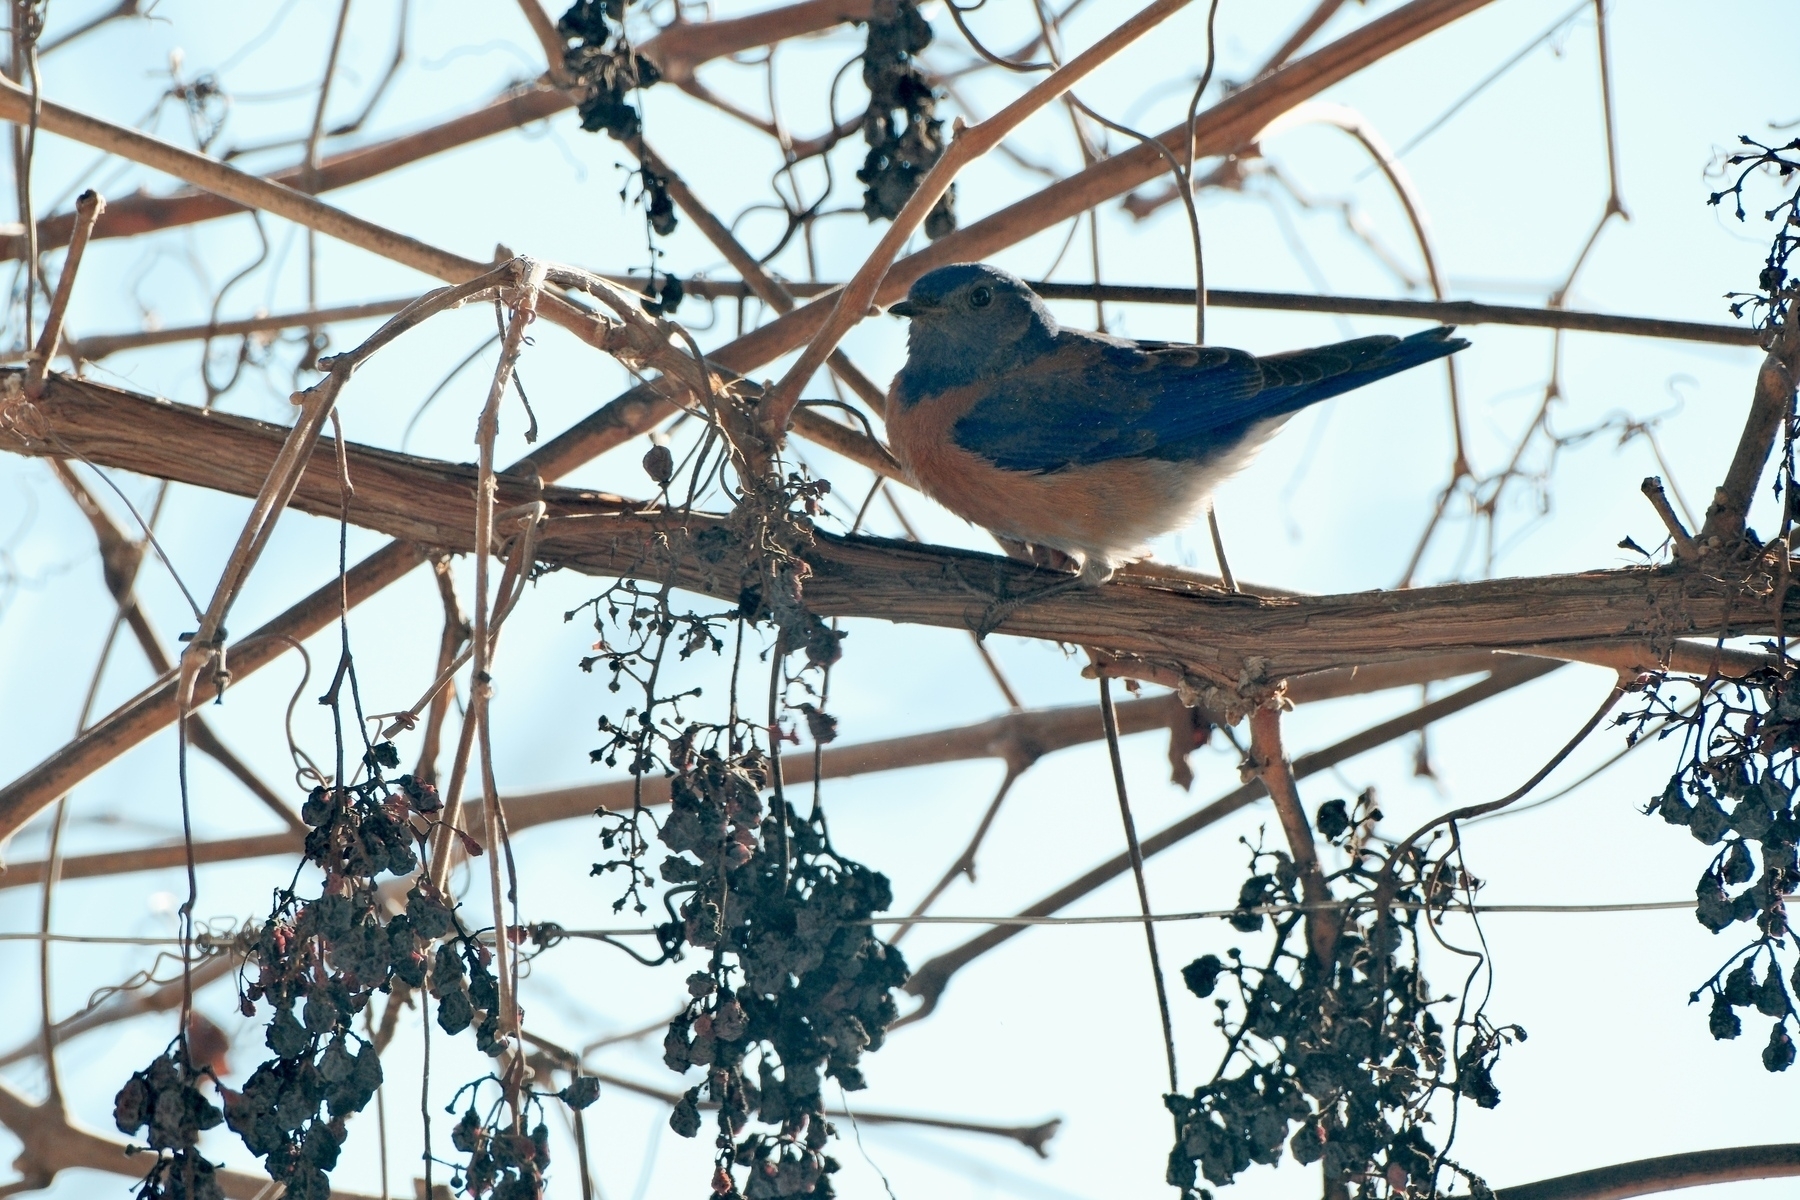 A blue bird with a blue back and rust red chest sits on a thick grape vine loaded with desiccated clumps of grapes (raisins).